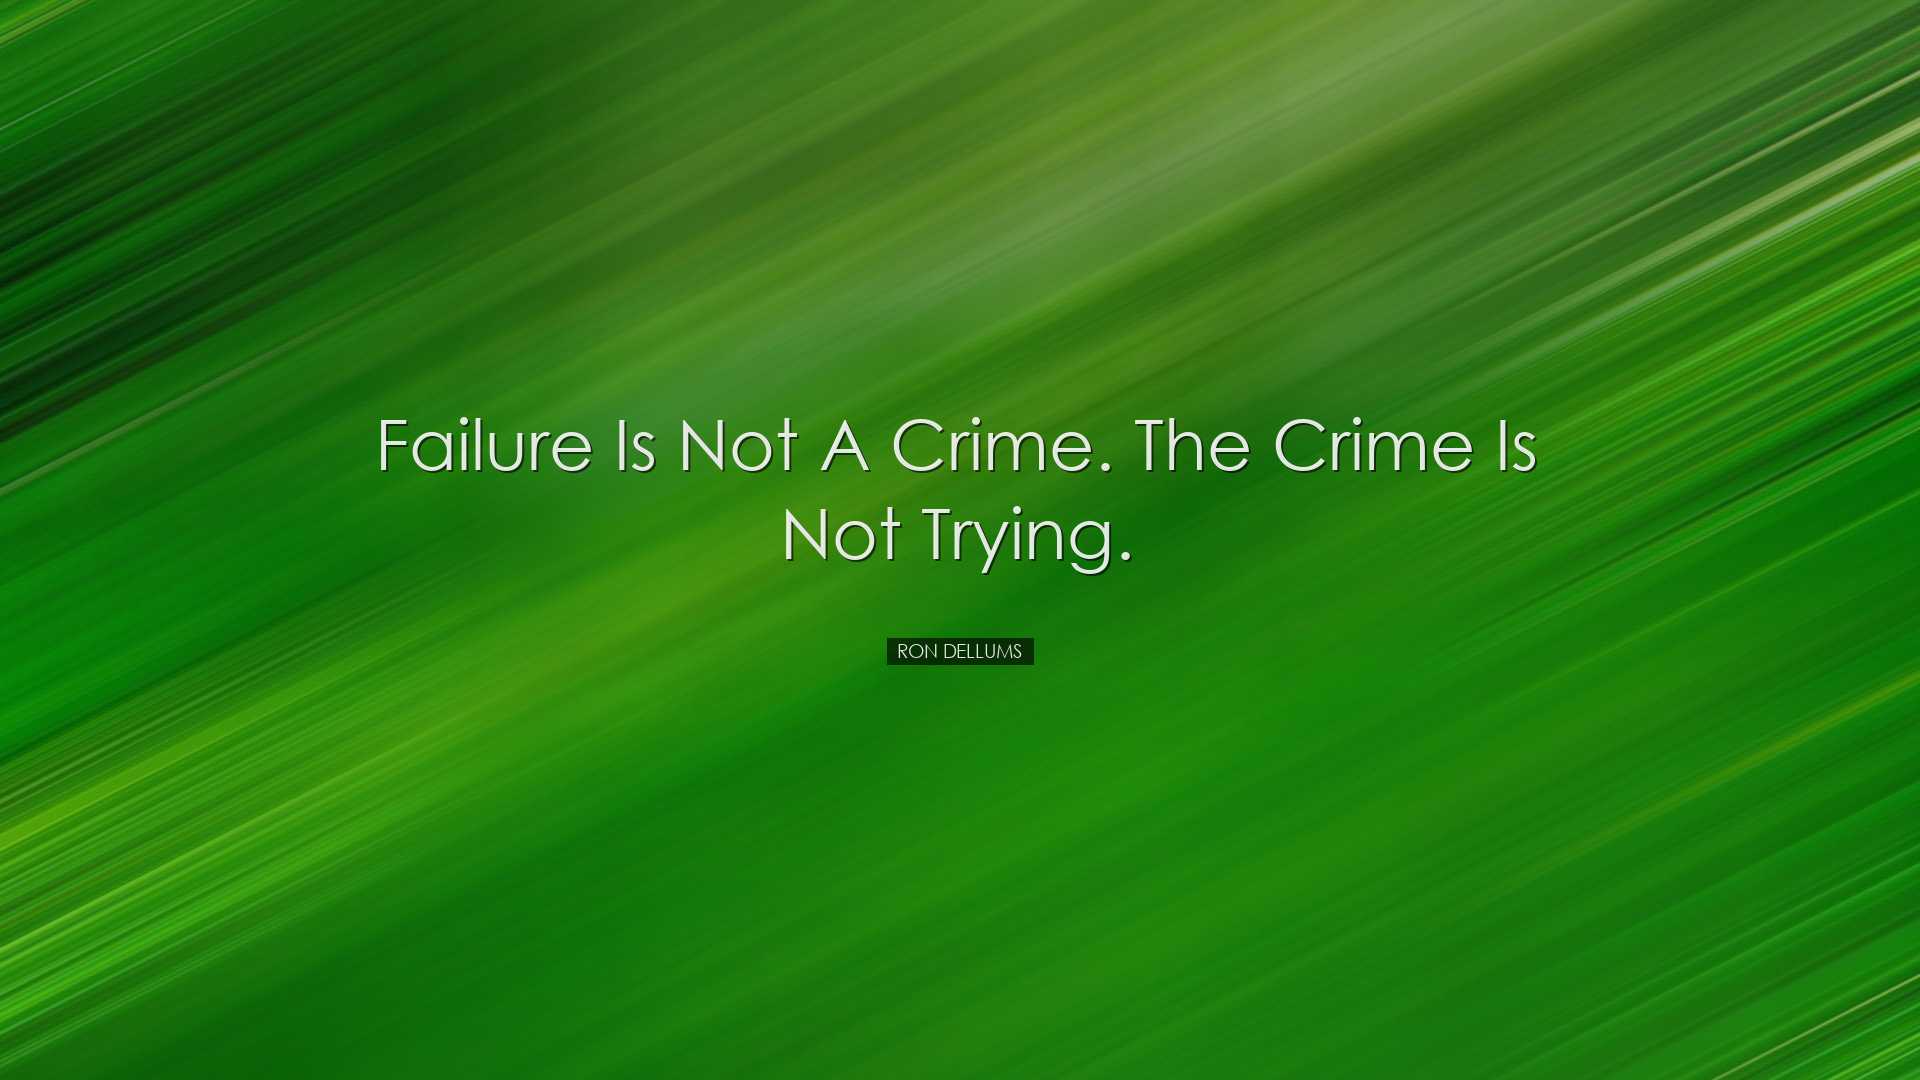 Failure is not a crime. The crime is not trying. - Ron Dellums